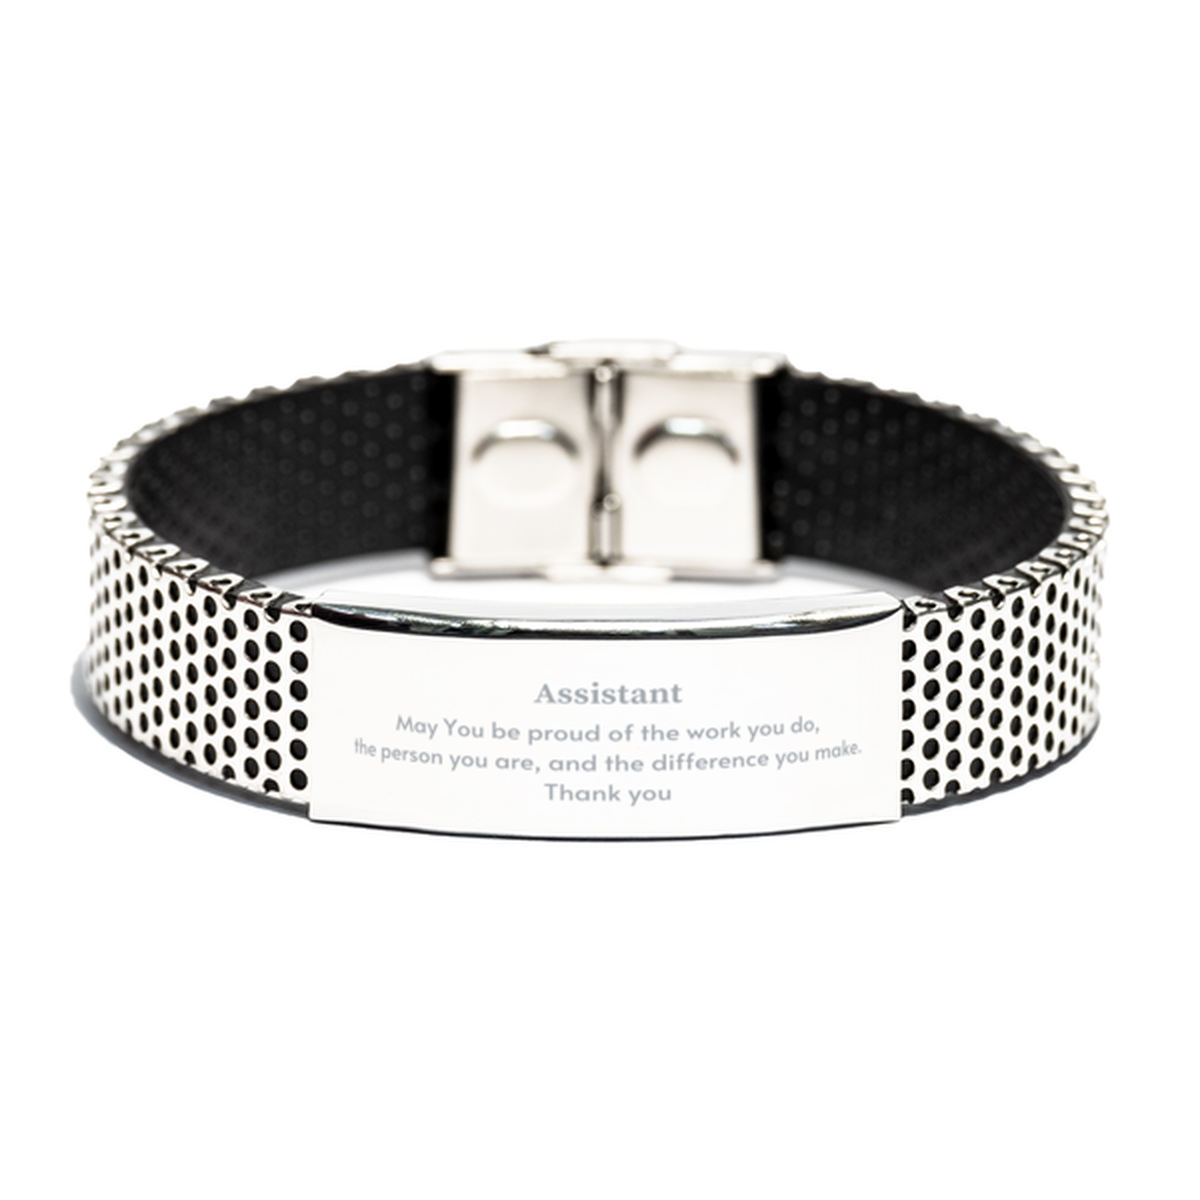 Heartwarming Stainless Steel Bracelet Retirement Coworkers Gifts for Assistant, Assistant May You be proud of the work you do, the person you are Gifts for Boss Men Women Friends